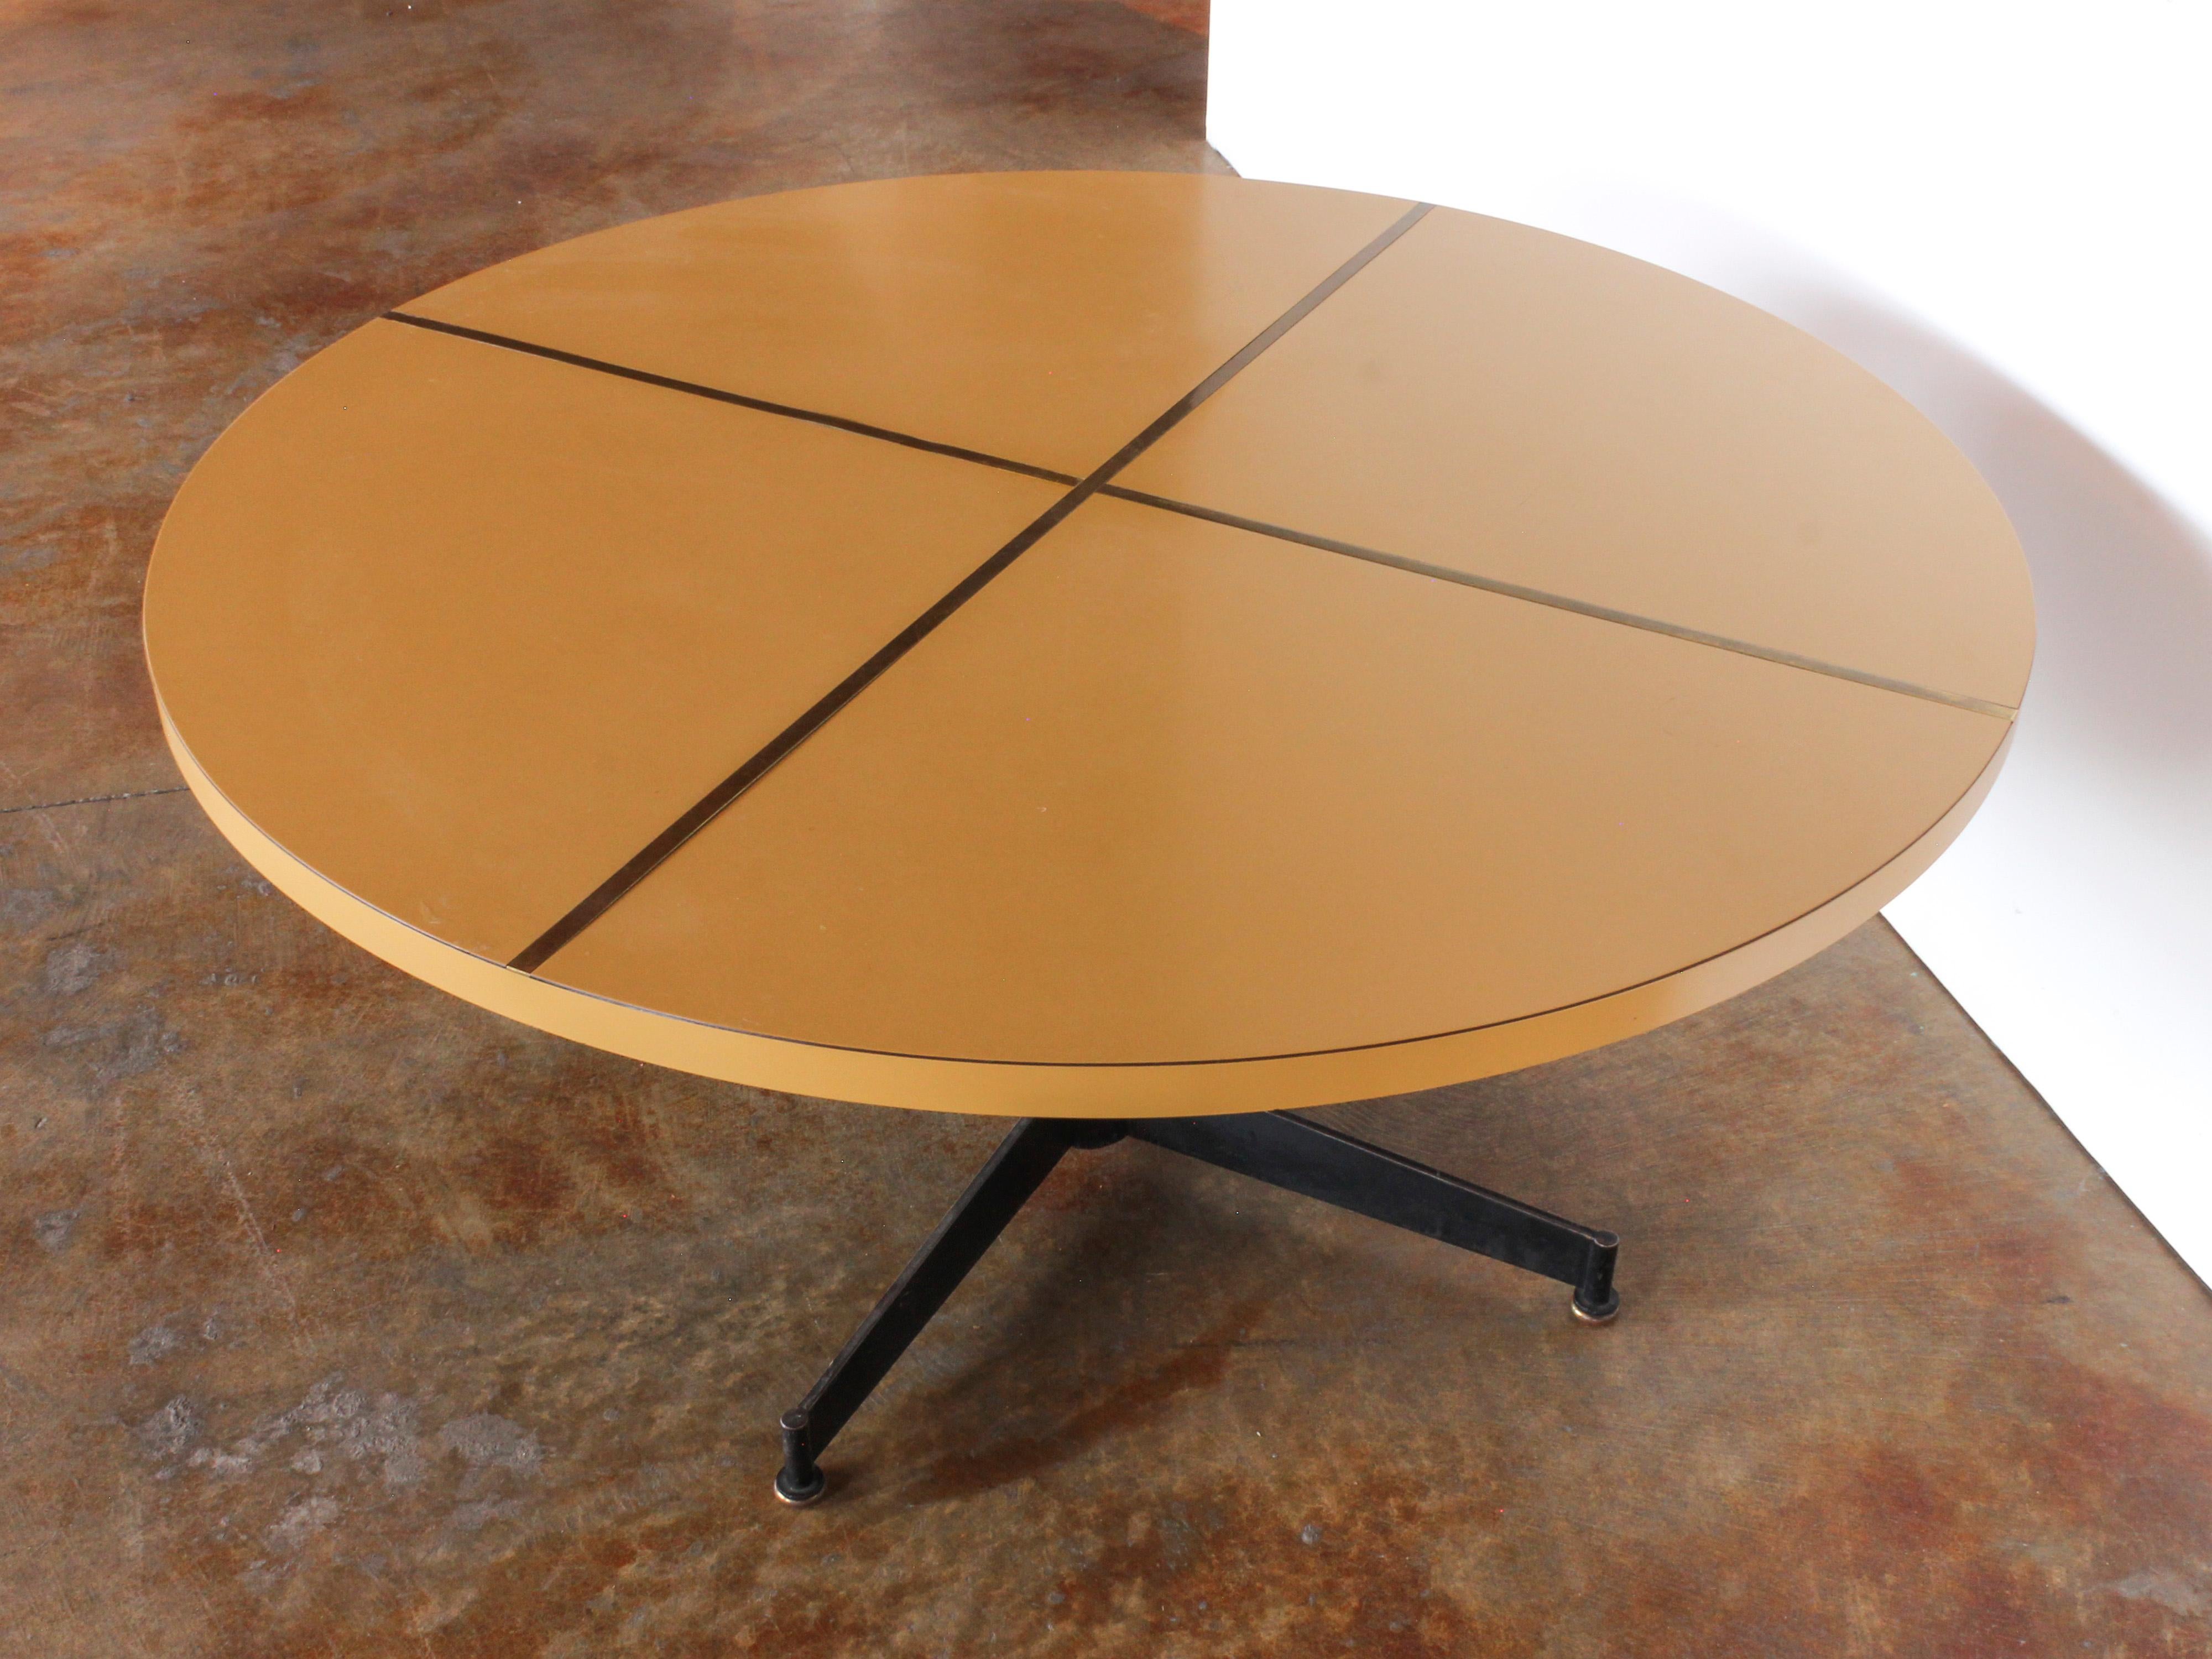 Mid-Century Modern Blackened Iron & Melamine Table with Brass Inlay, c. 1960 For Sale 4